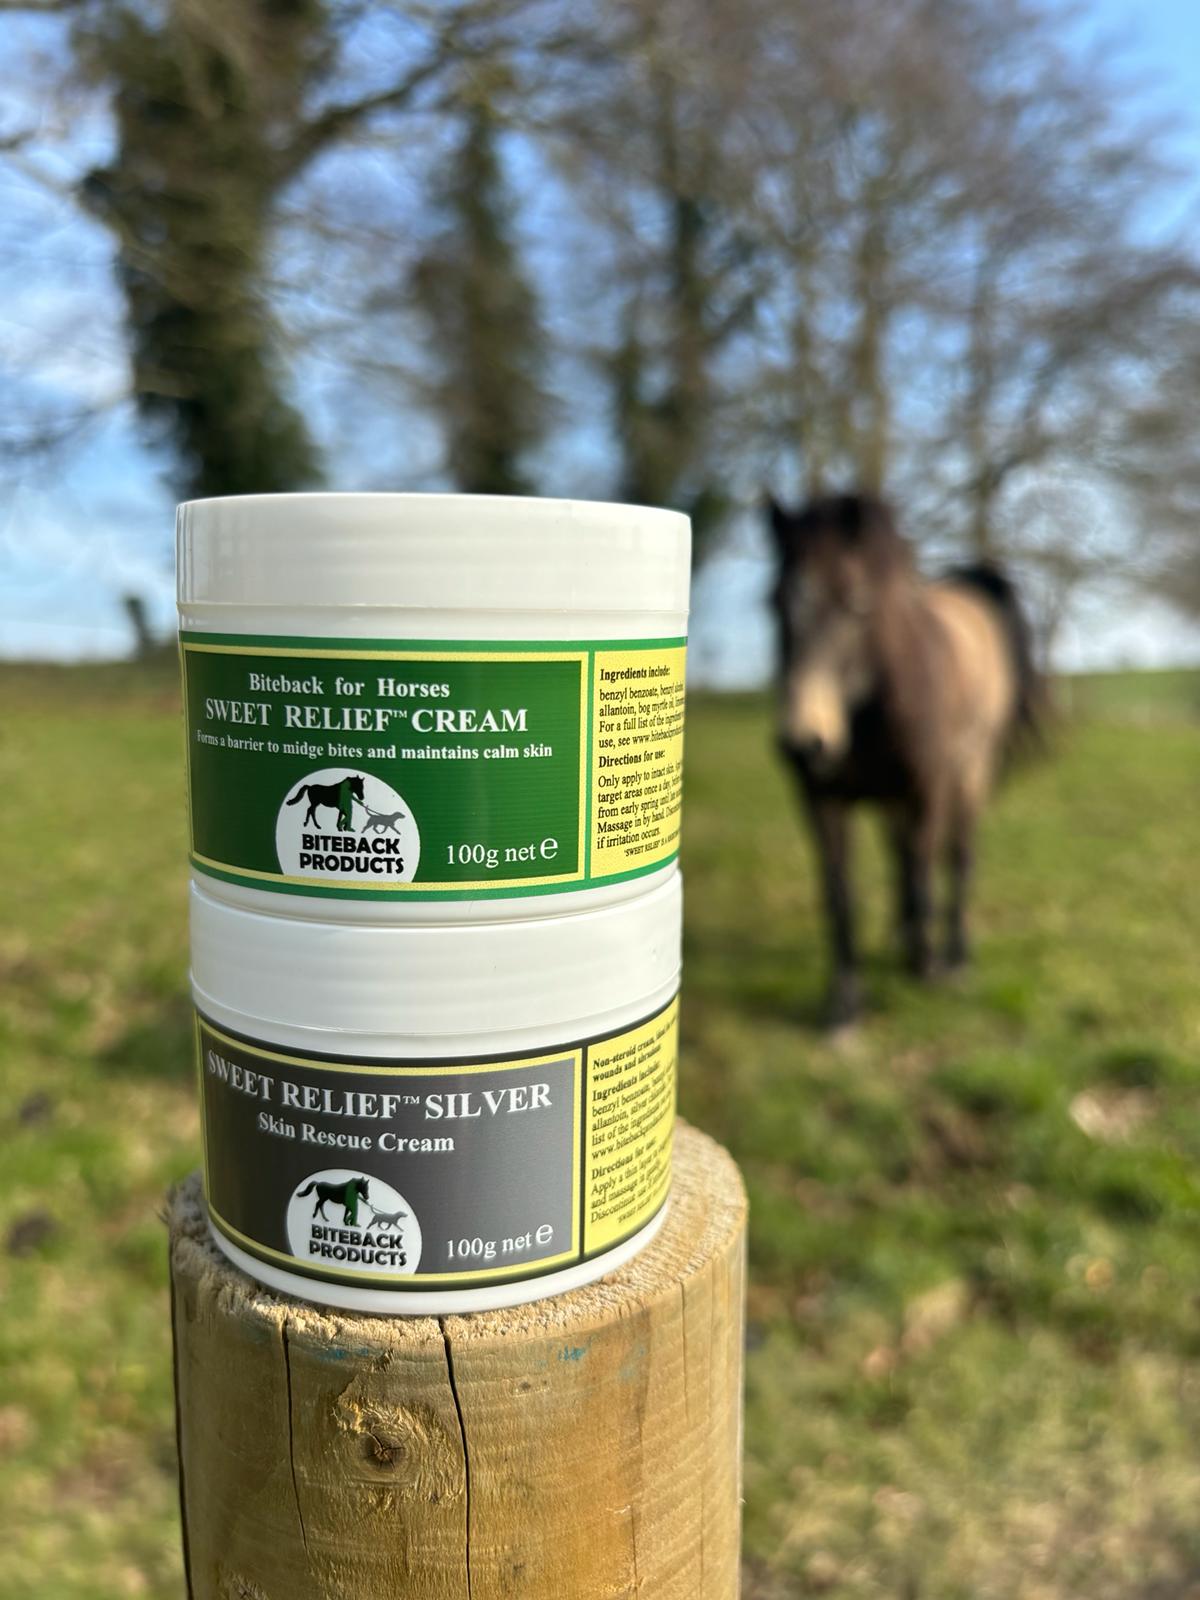 'Sweet Relief'™ Cream for Horses Sample Duo: 2 x 100g pots